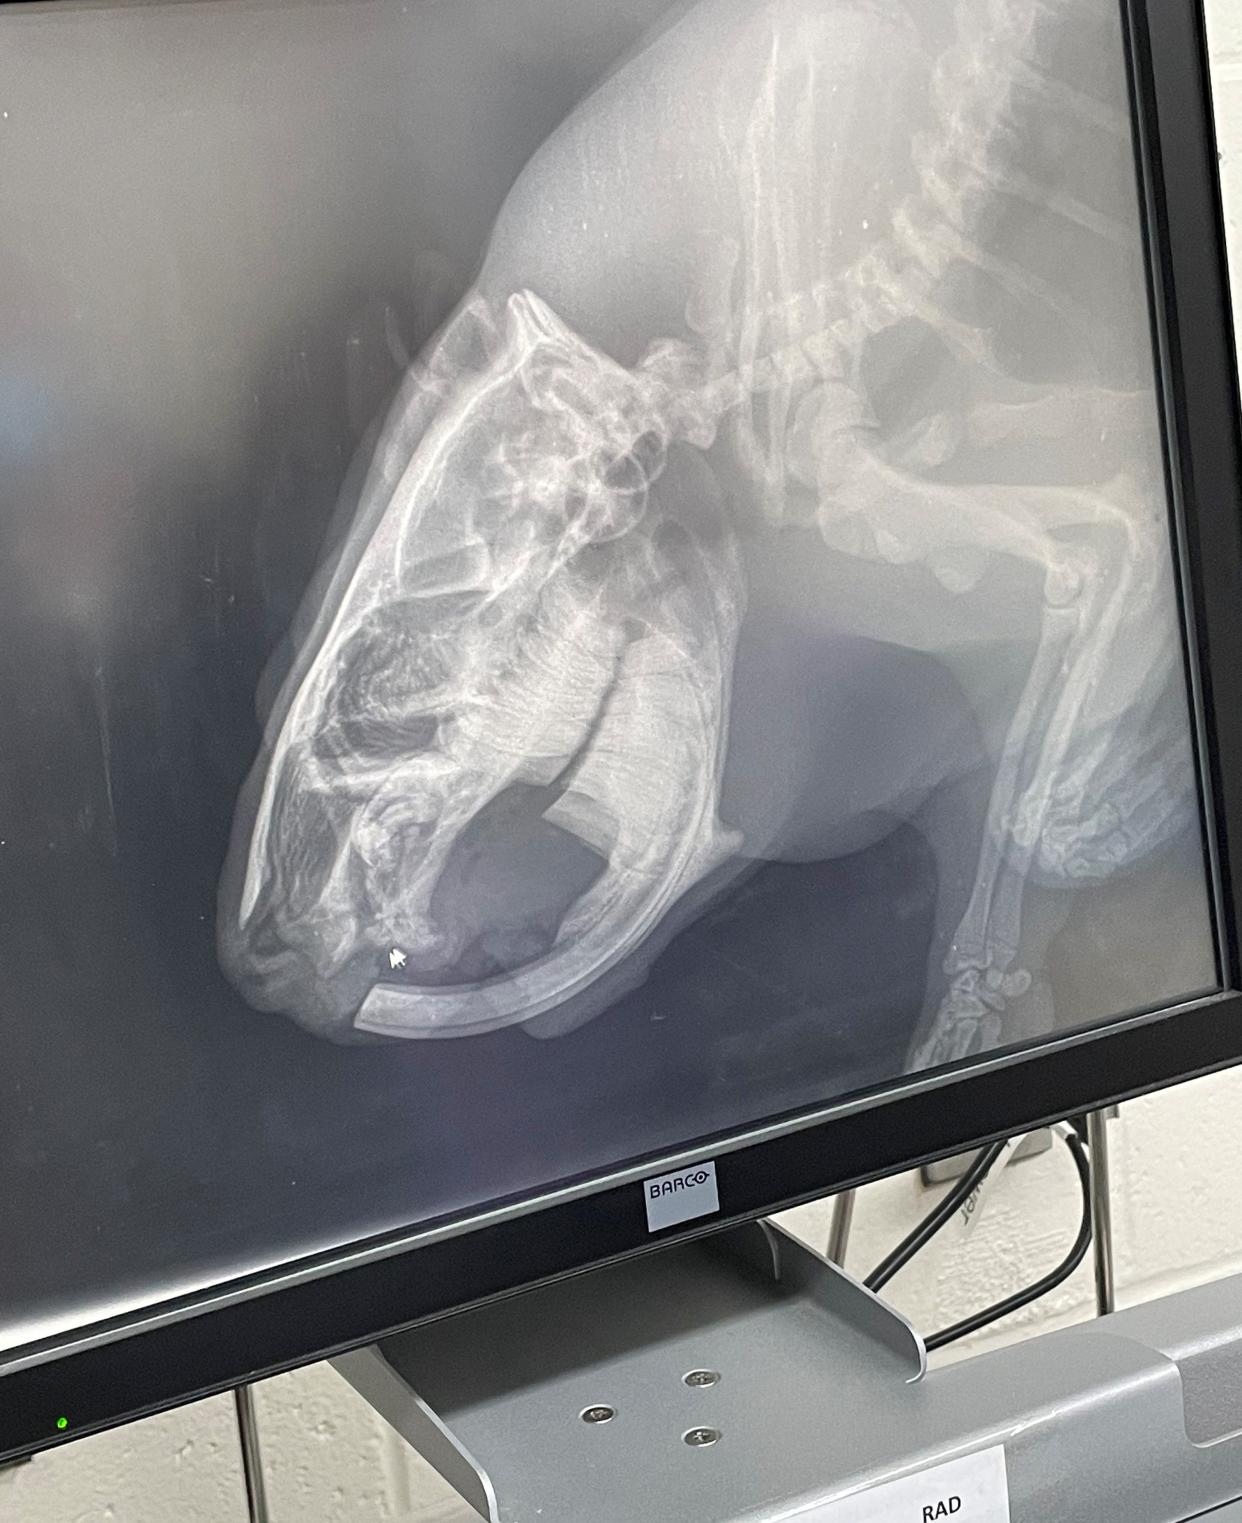 This file photo shows an X-ray image, taken on April 22, 2021, of the skull and teeth of Frances, a North American beaver who lived at the Utica Zoo. At the time, Frances' top teeth had already fallen out and he needed dental work. Frances died in December 2023.